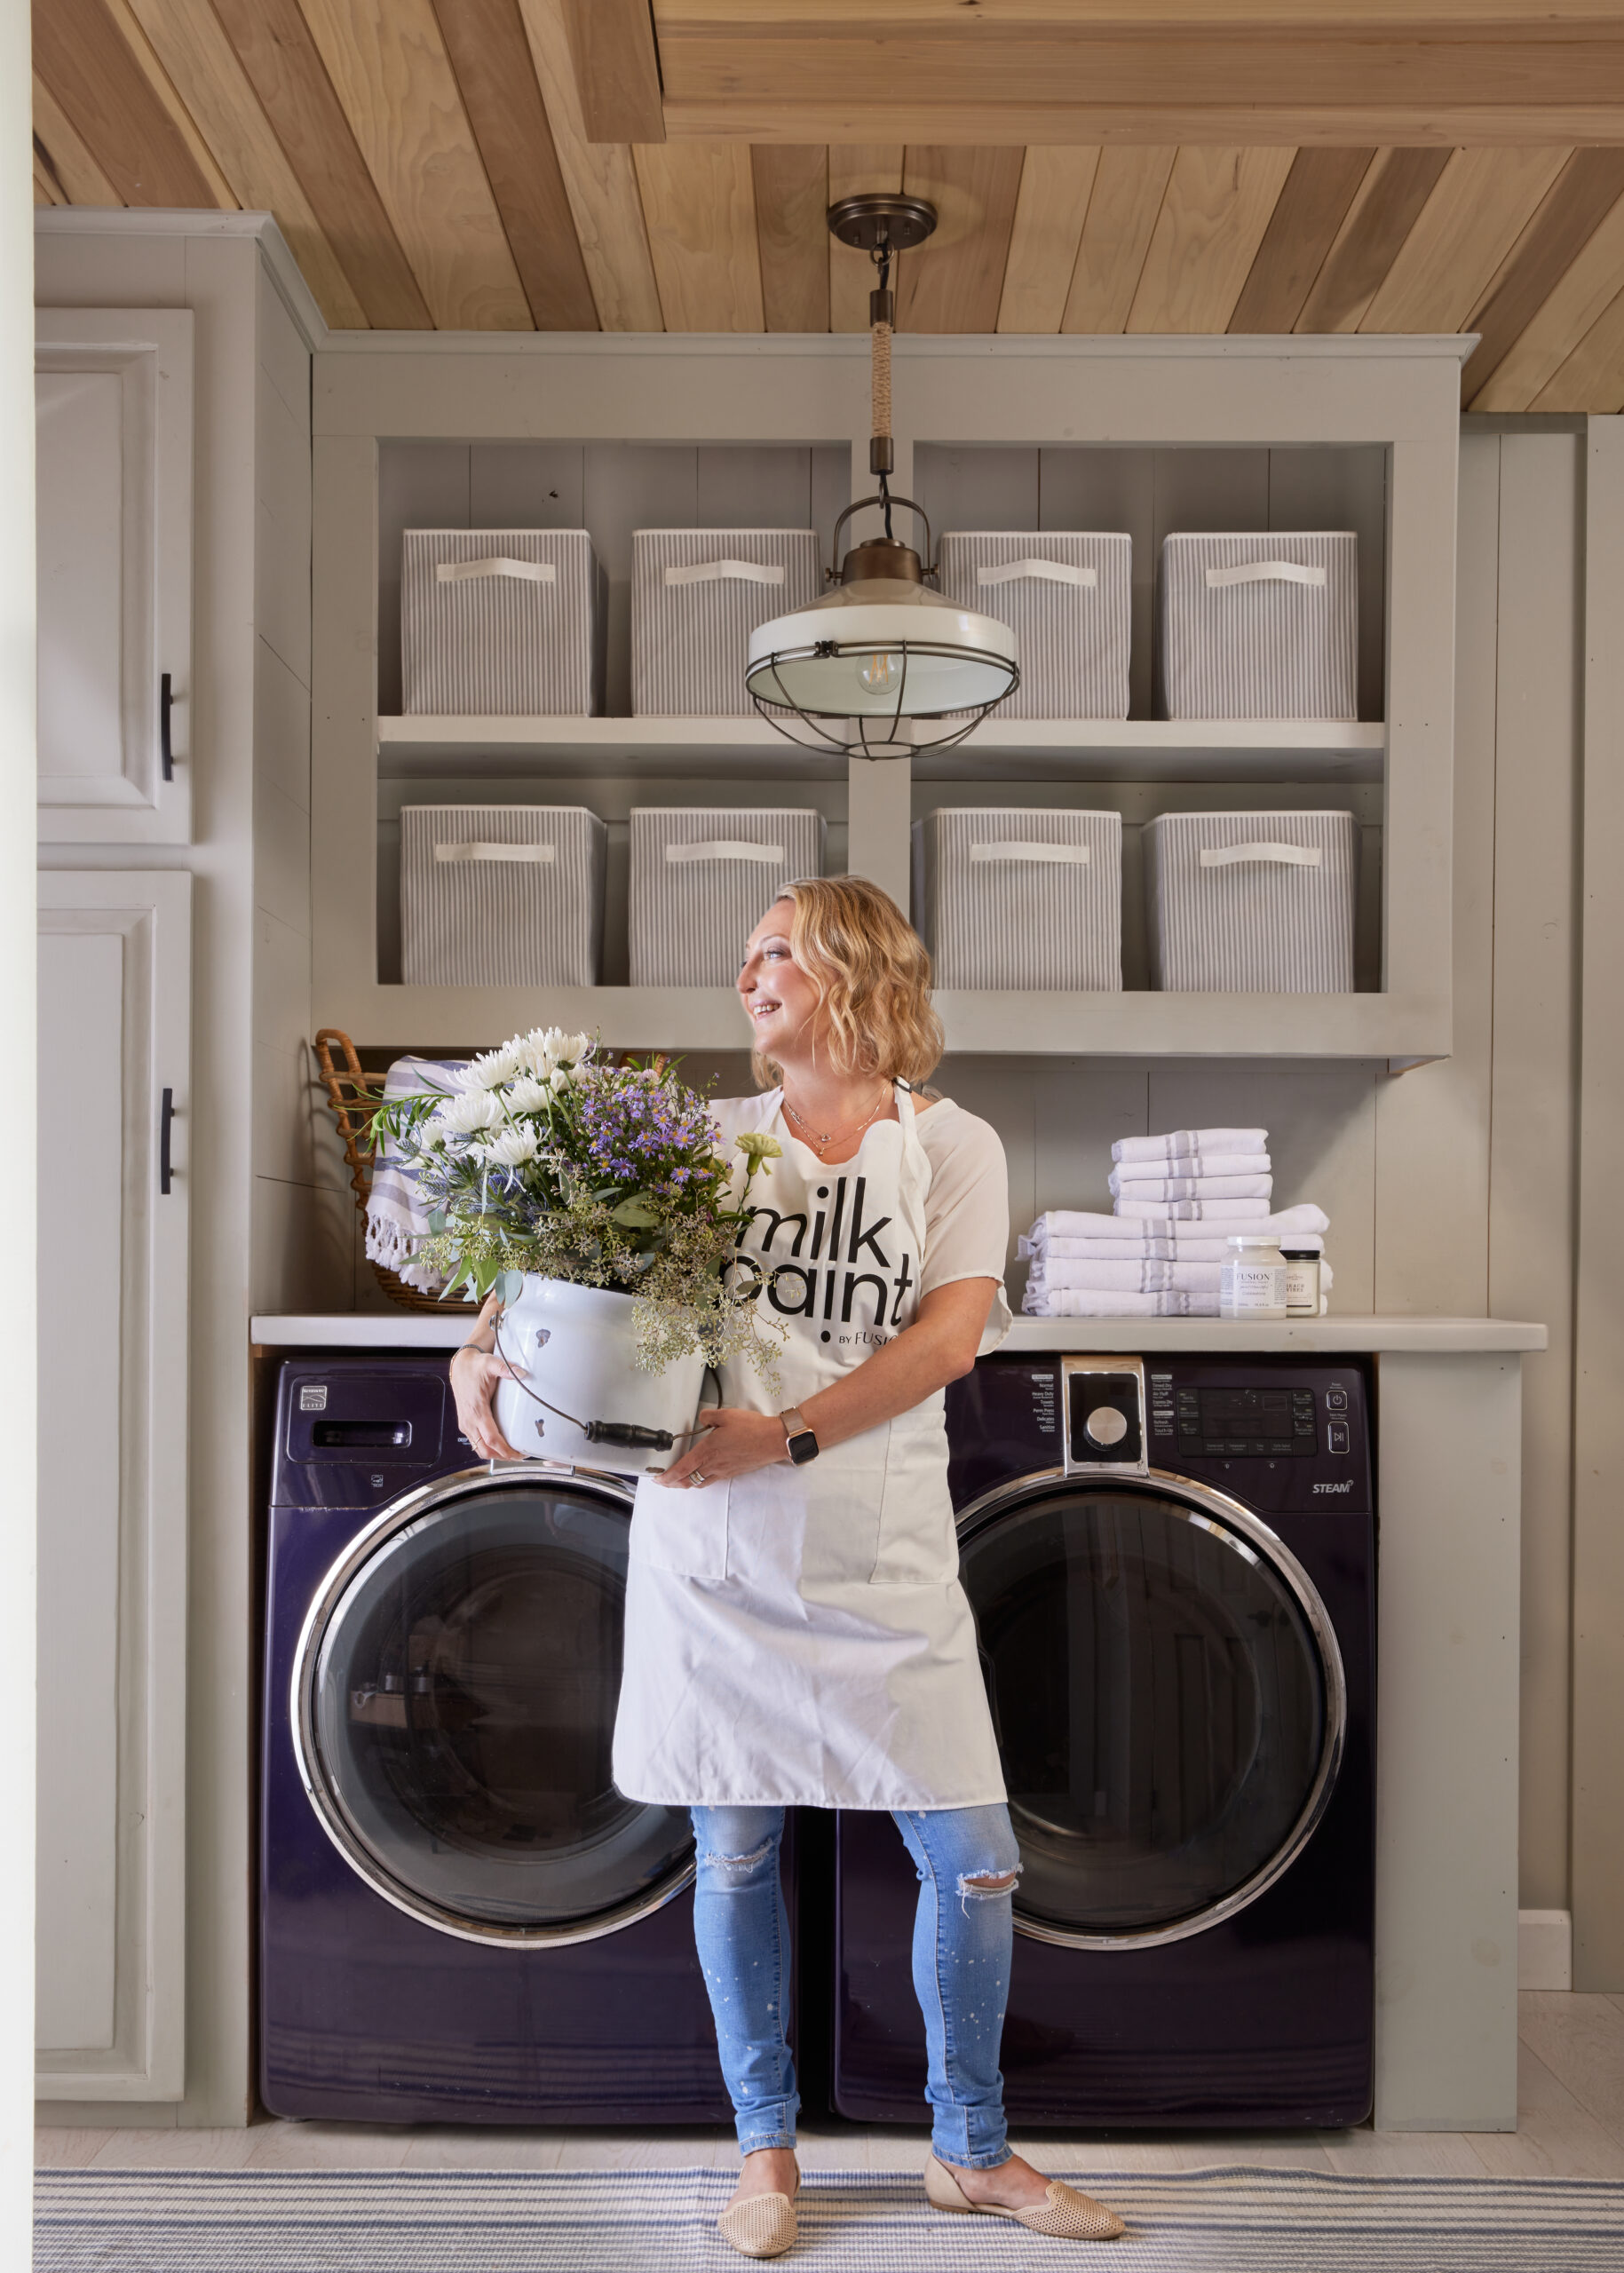 Jennylyn holding a bouquet of flowers, wearing a milk paint apron & standing in front of dark washer/dryer with light coloured walls/cabinets & grey baskets